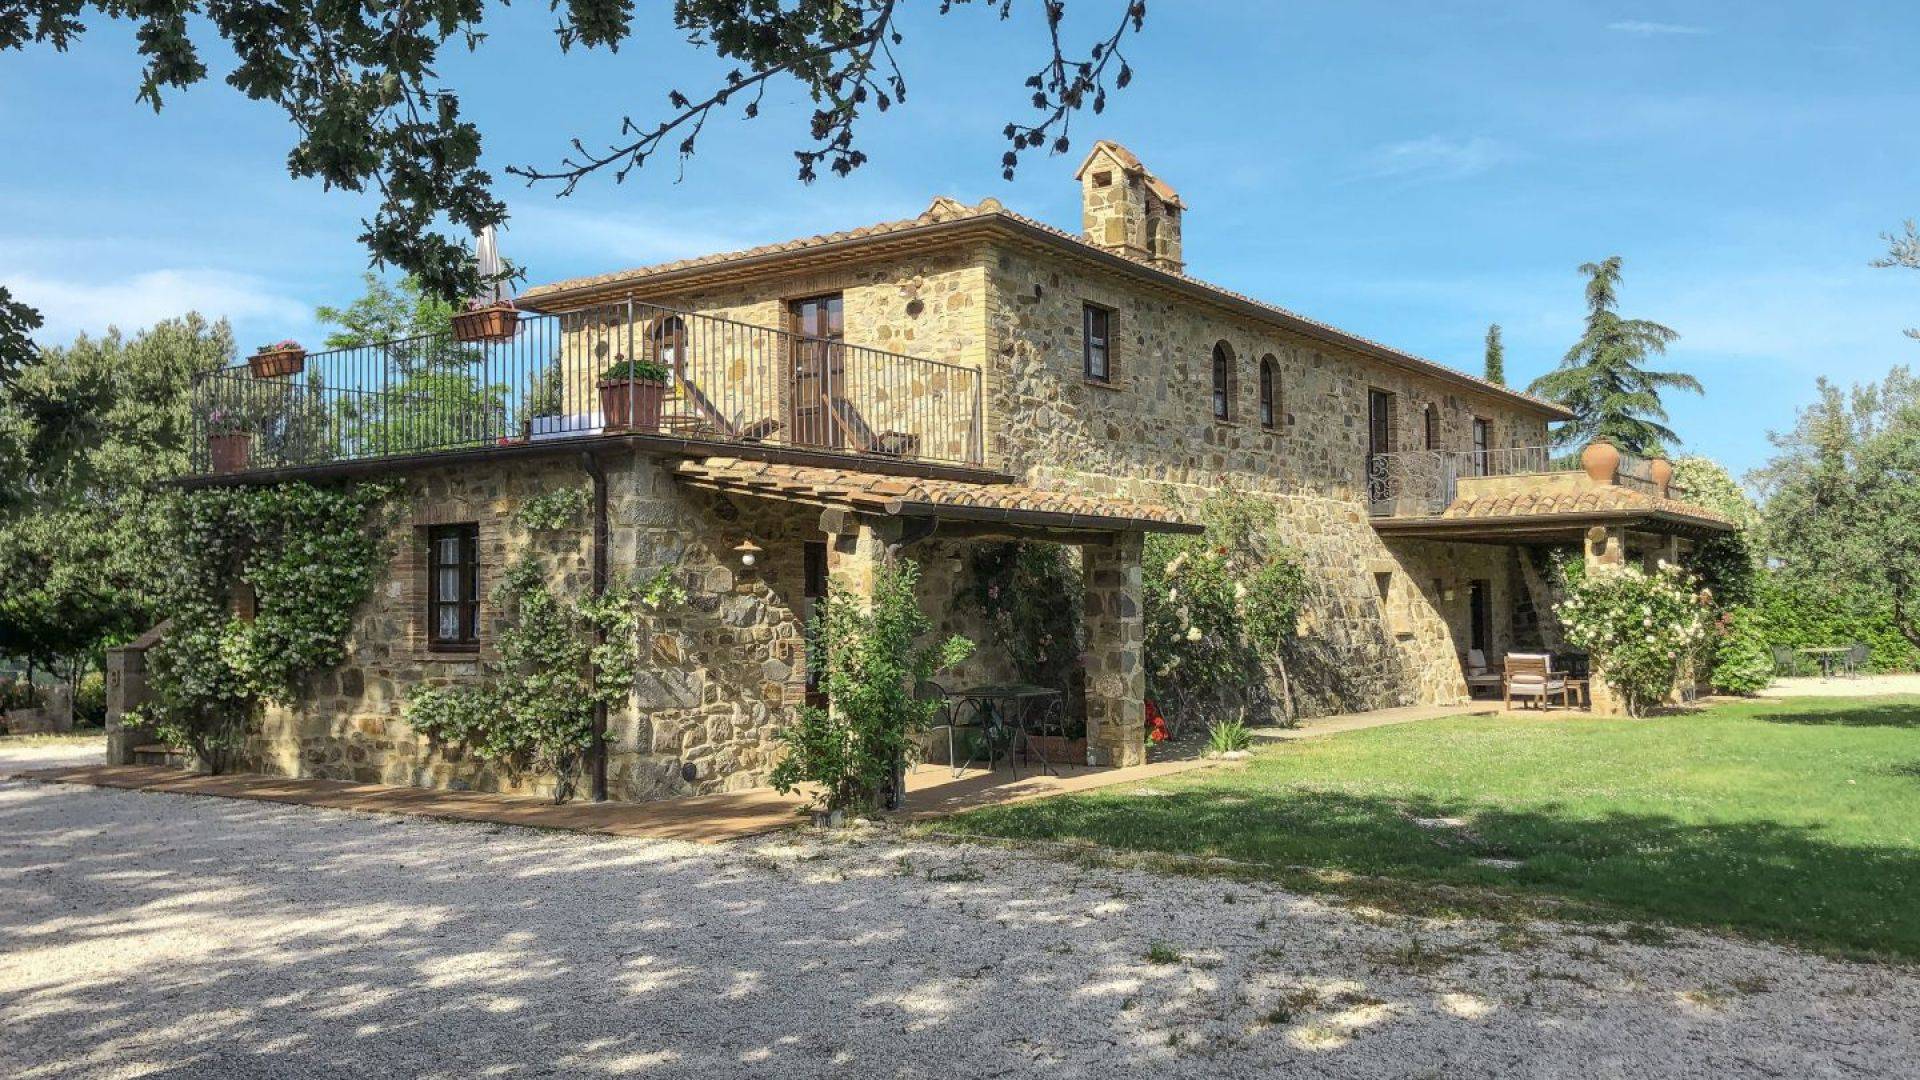 Stylishly 16th century stone farmhouse restored with 6 flats and pool for sale in Val d'Orcia, Tuscany